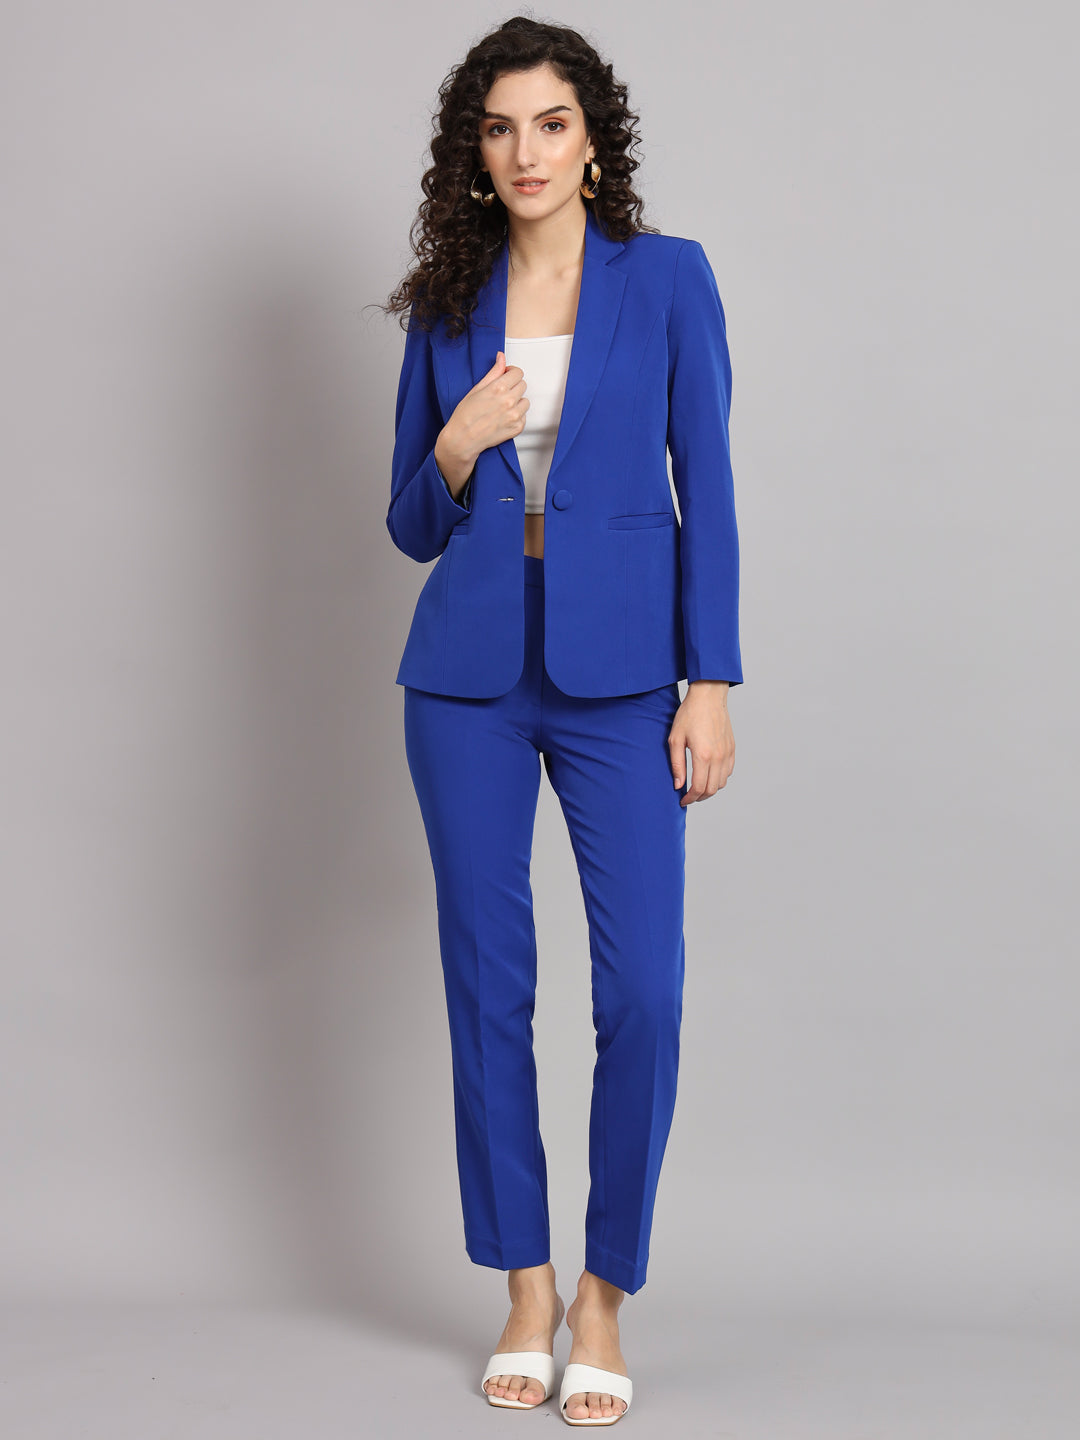 Buy Womens Pant Suit Online In India -  India